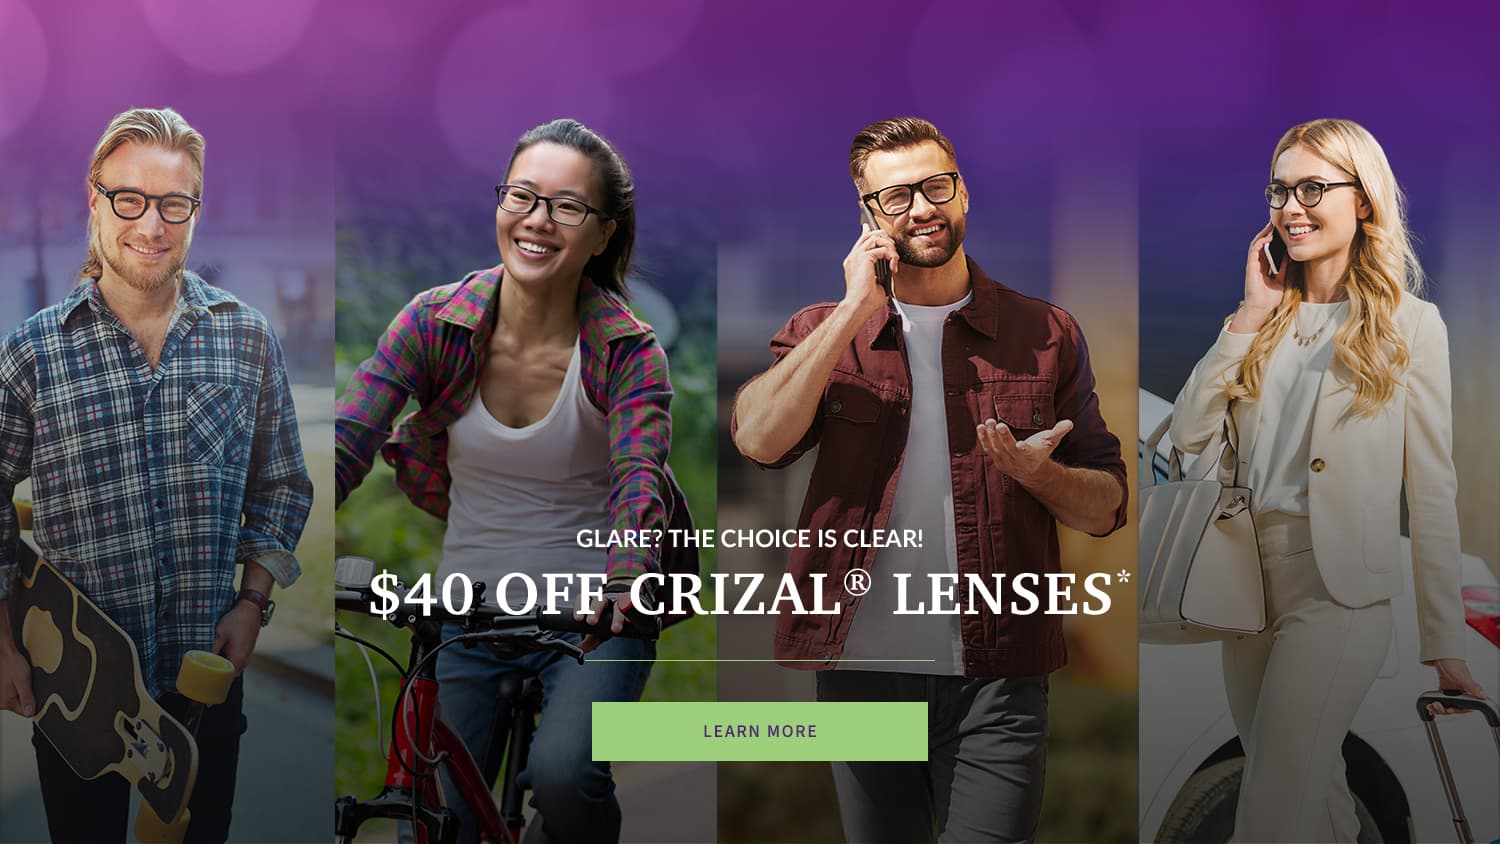 Glare? The Choice is Clear! $40 Off Crizal Lenses*